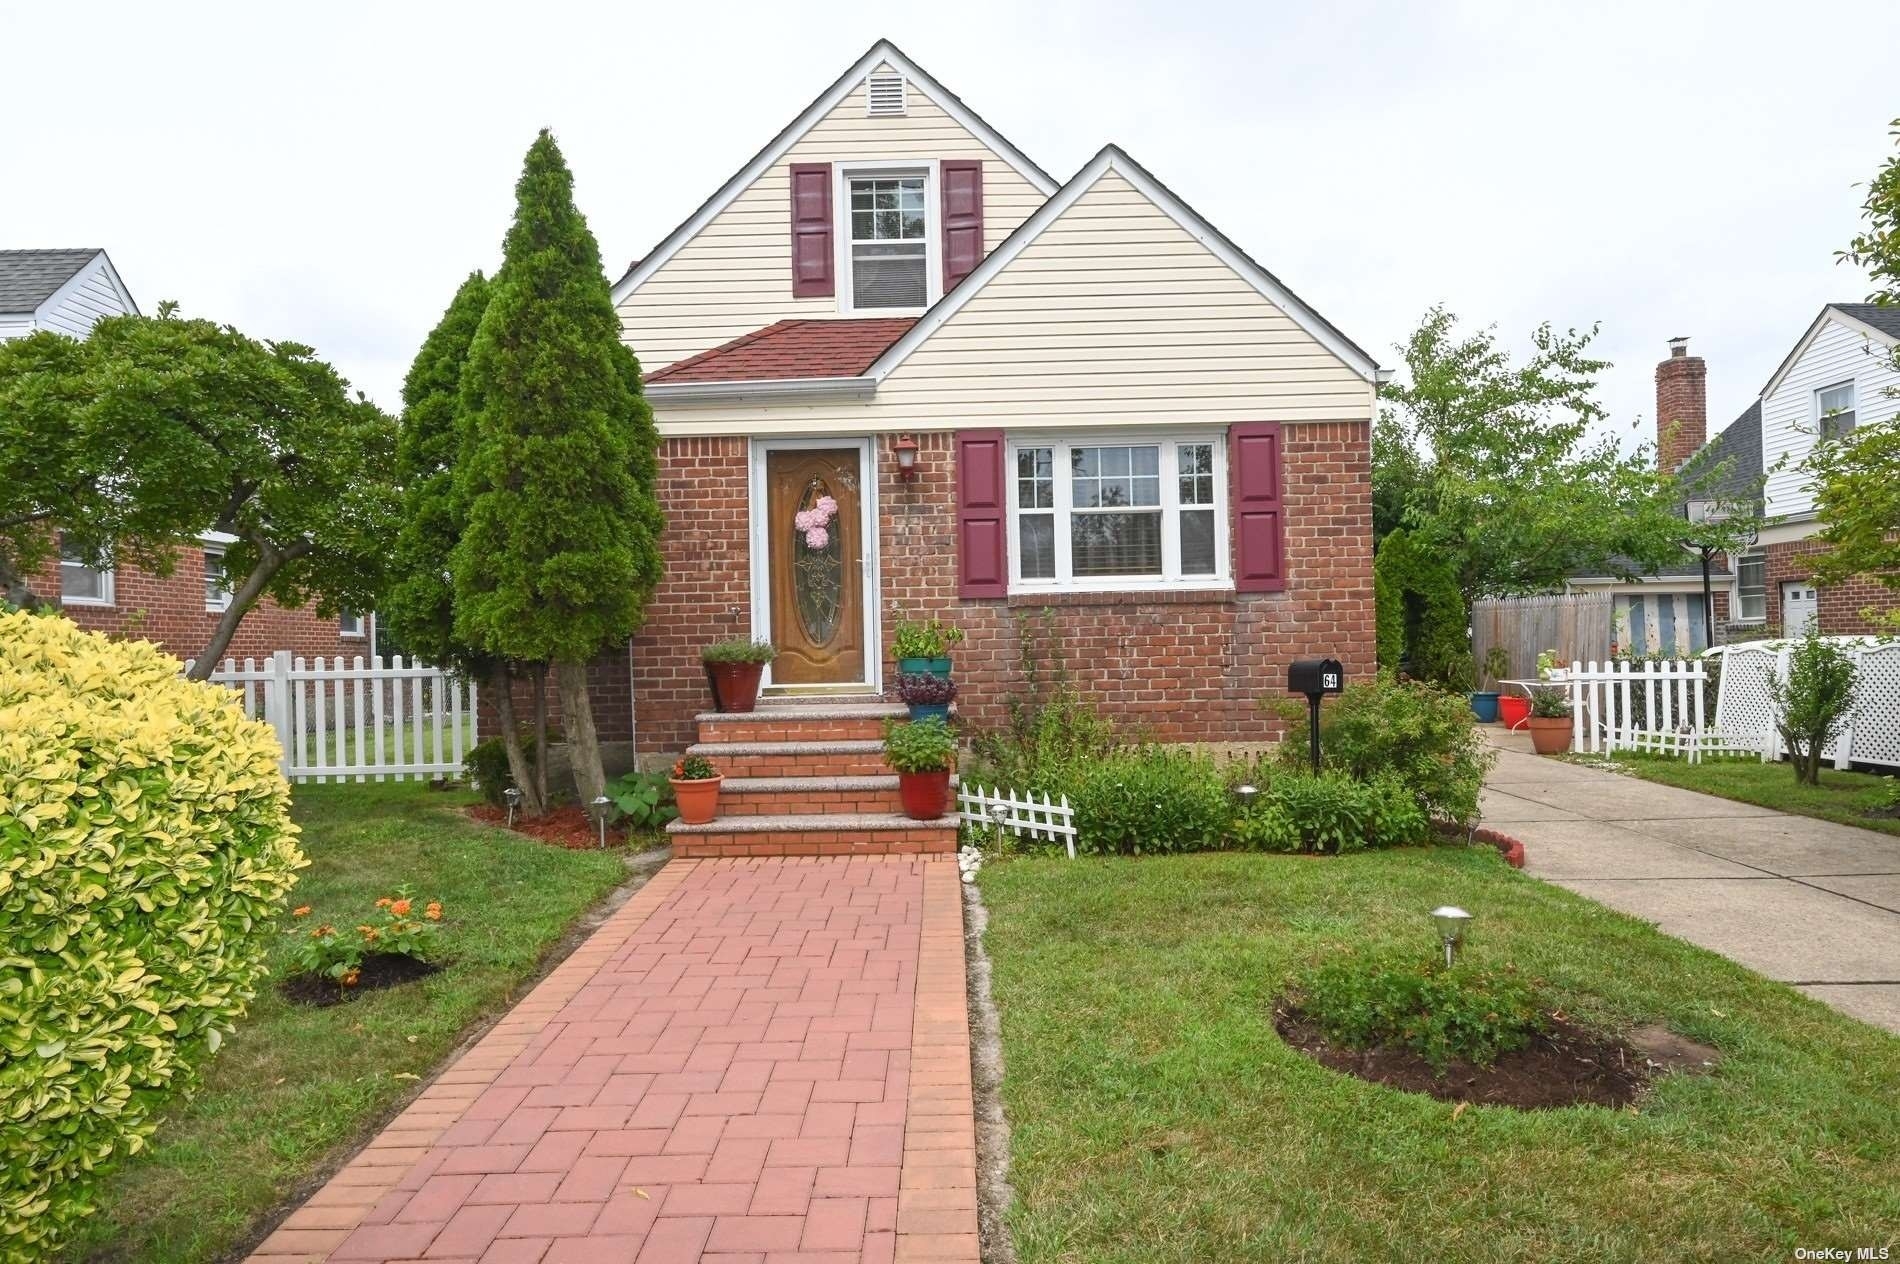 Single Family Home at Elmont